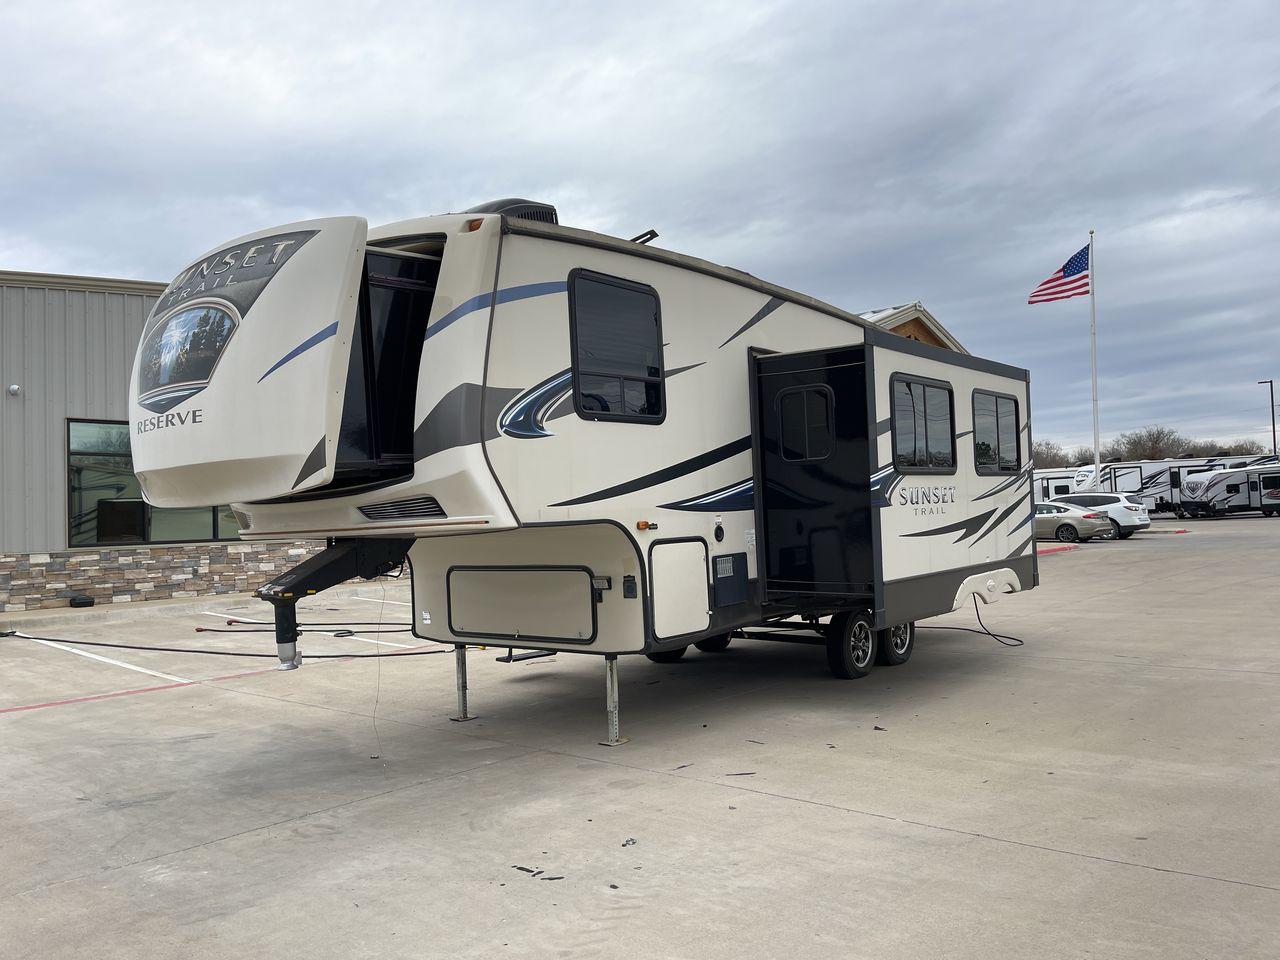 2015 CROSSROADS SUNSET TRAIL RESERVE (4V0FC2624FB) , Length: 30.17 ft | Dry Weight: 6,401 lbs | Gross Weight: 9,542 lbs | Slides: 2 transmission, located at 4319 N Main St, Cleburne, TX, 76033, (817) 678-5133, 32.385960, -97.391212 - This model has the right mix of space and maneuverability, with a length of 30 feet and a dry weight of 6,401 pounds. With a strong aluminum frame and fiberglass sidewalls, it will last for a long time on the road, making it a great choice for travelers who want both style and dependability. The Sun - Photo #24